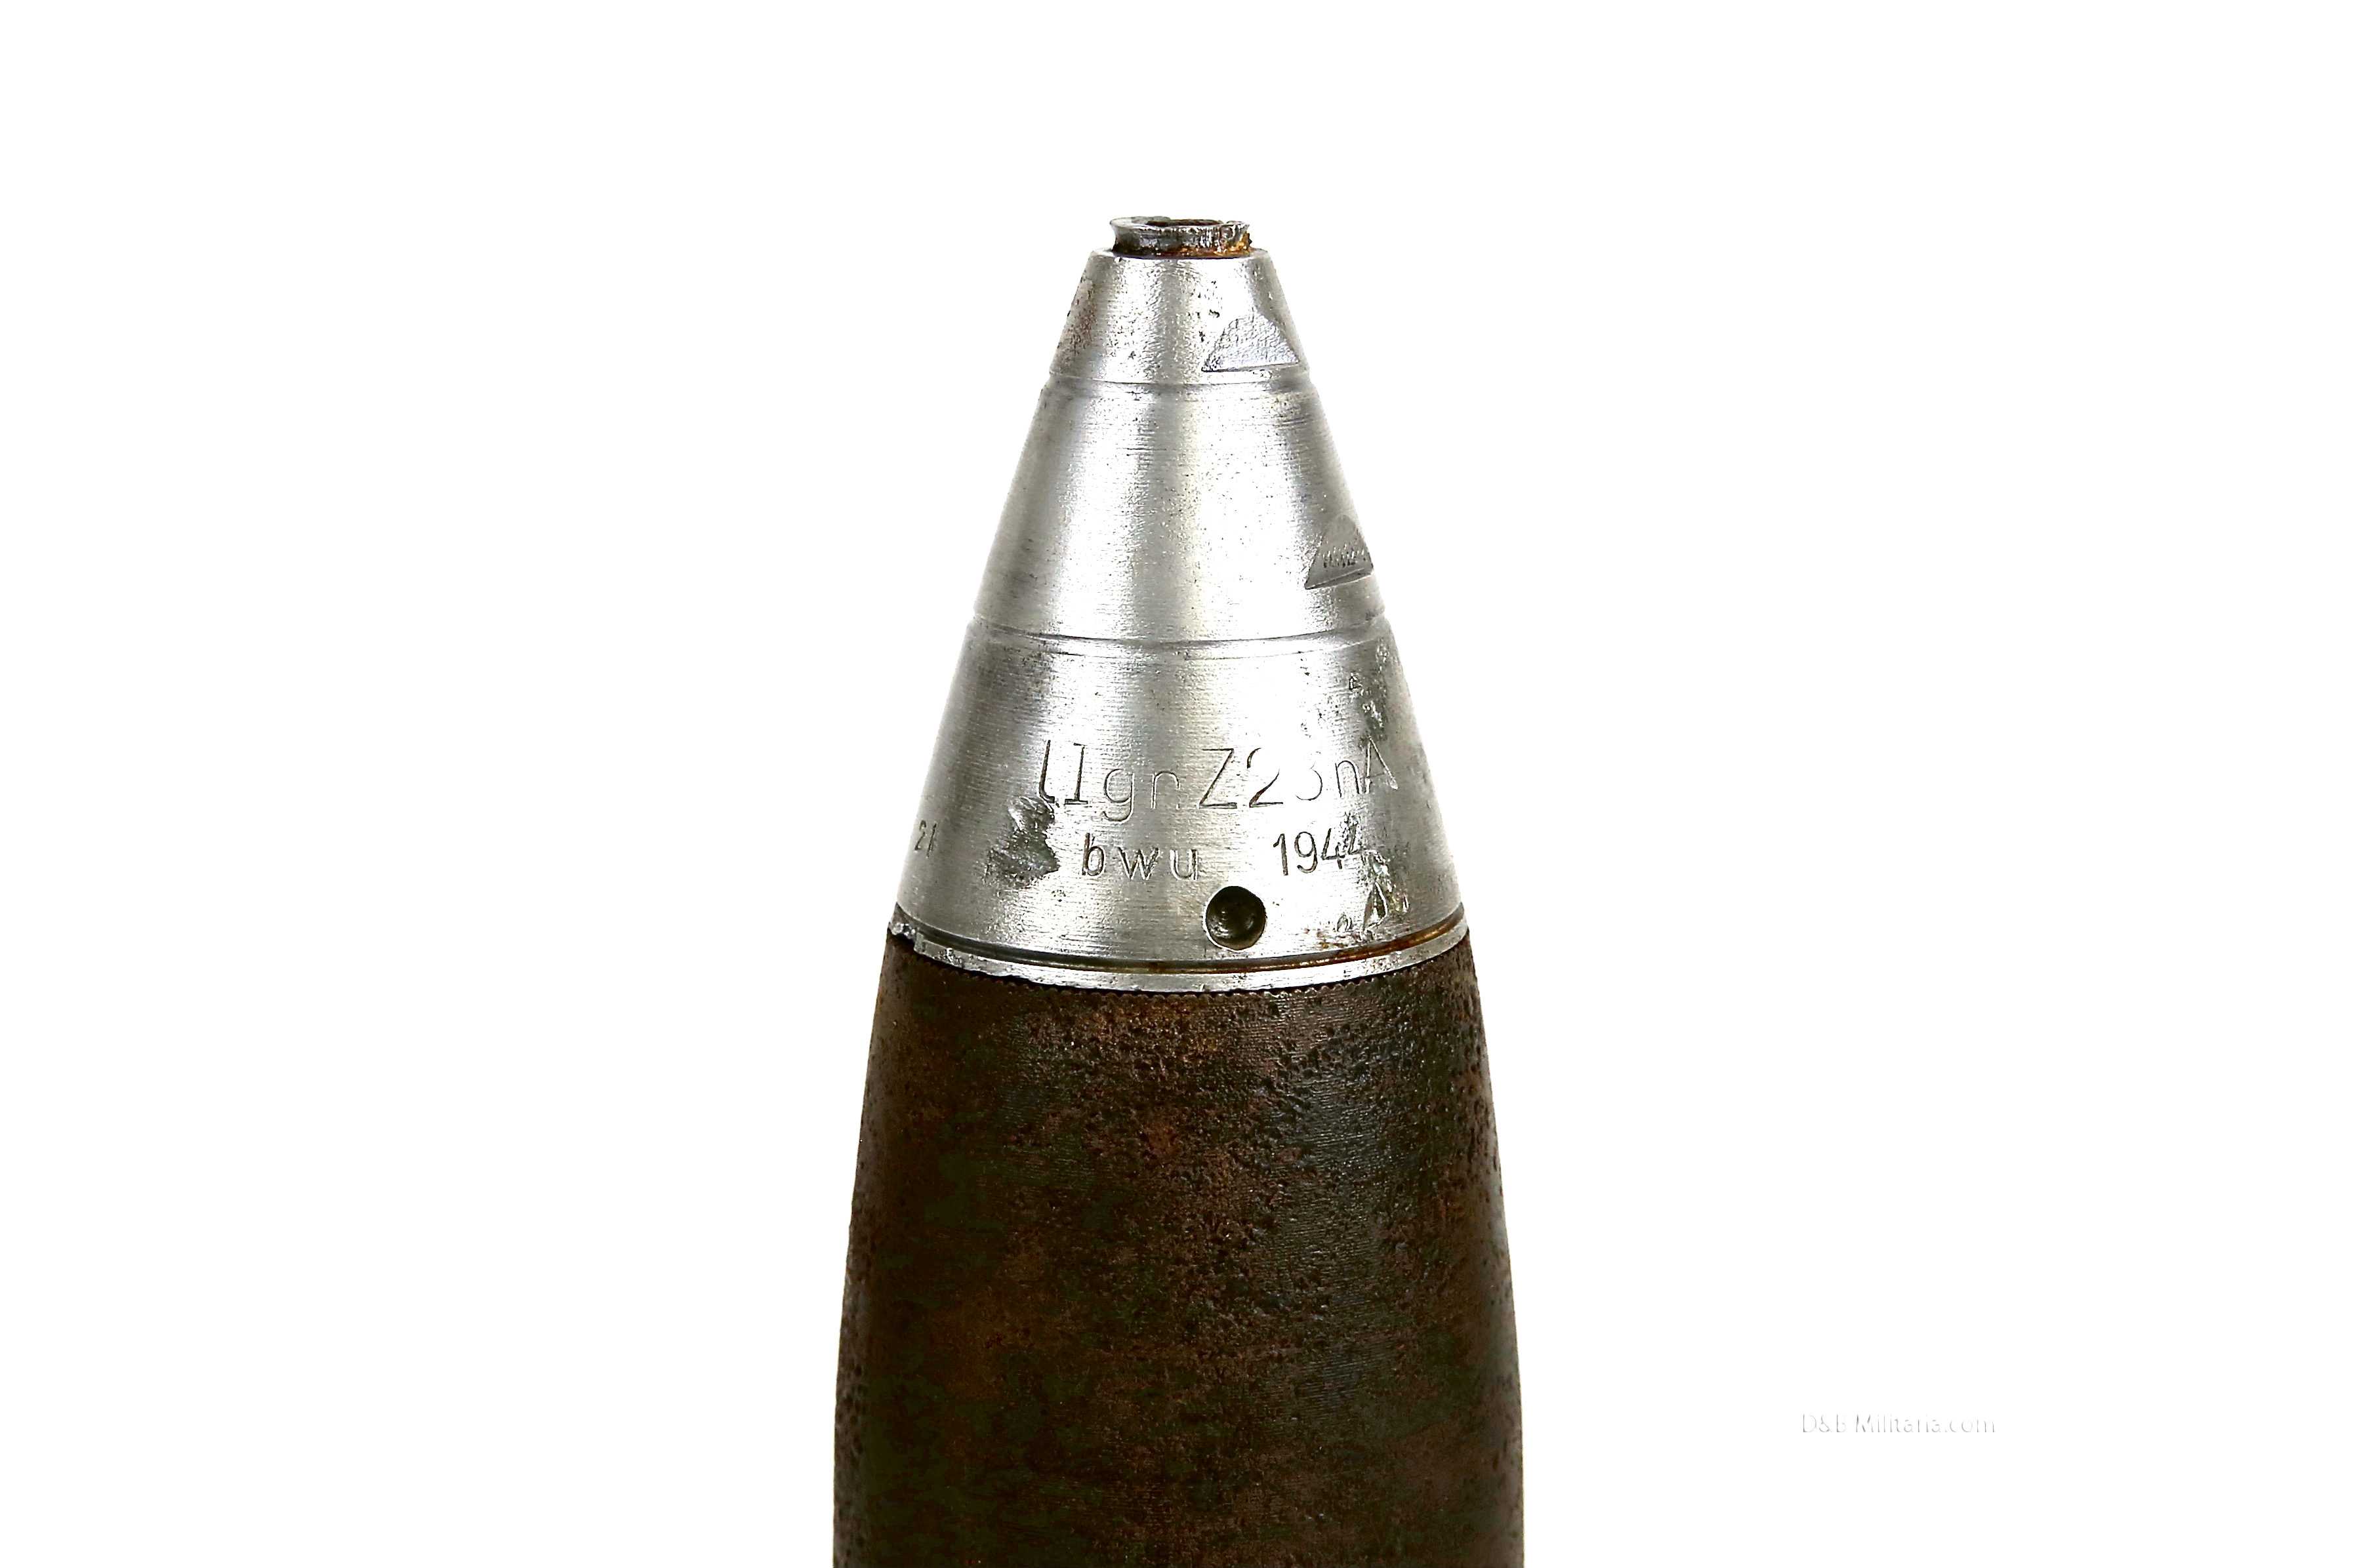 WW2 German LEIG18 7.5CM inert shell projectile with fuze